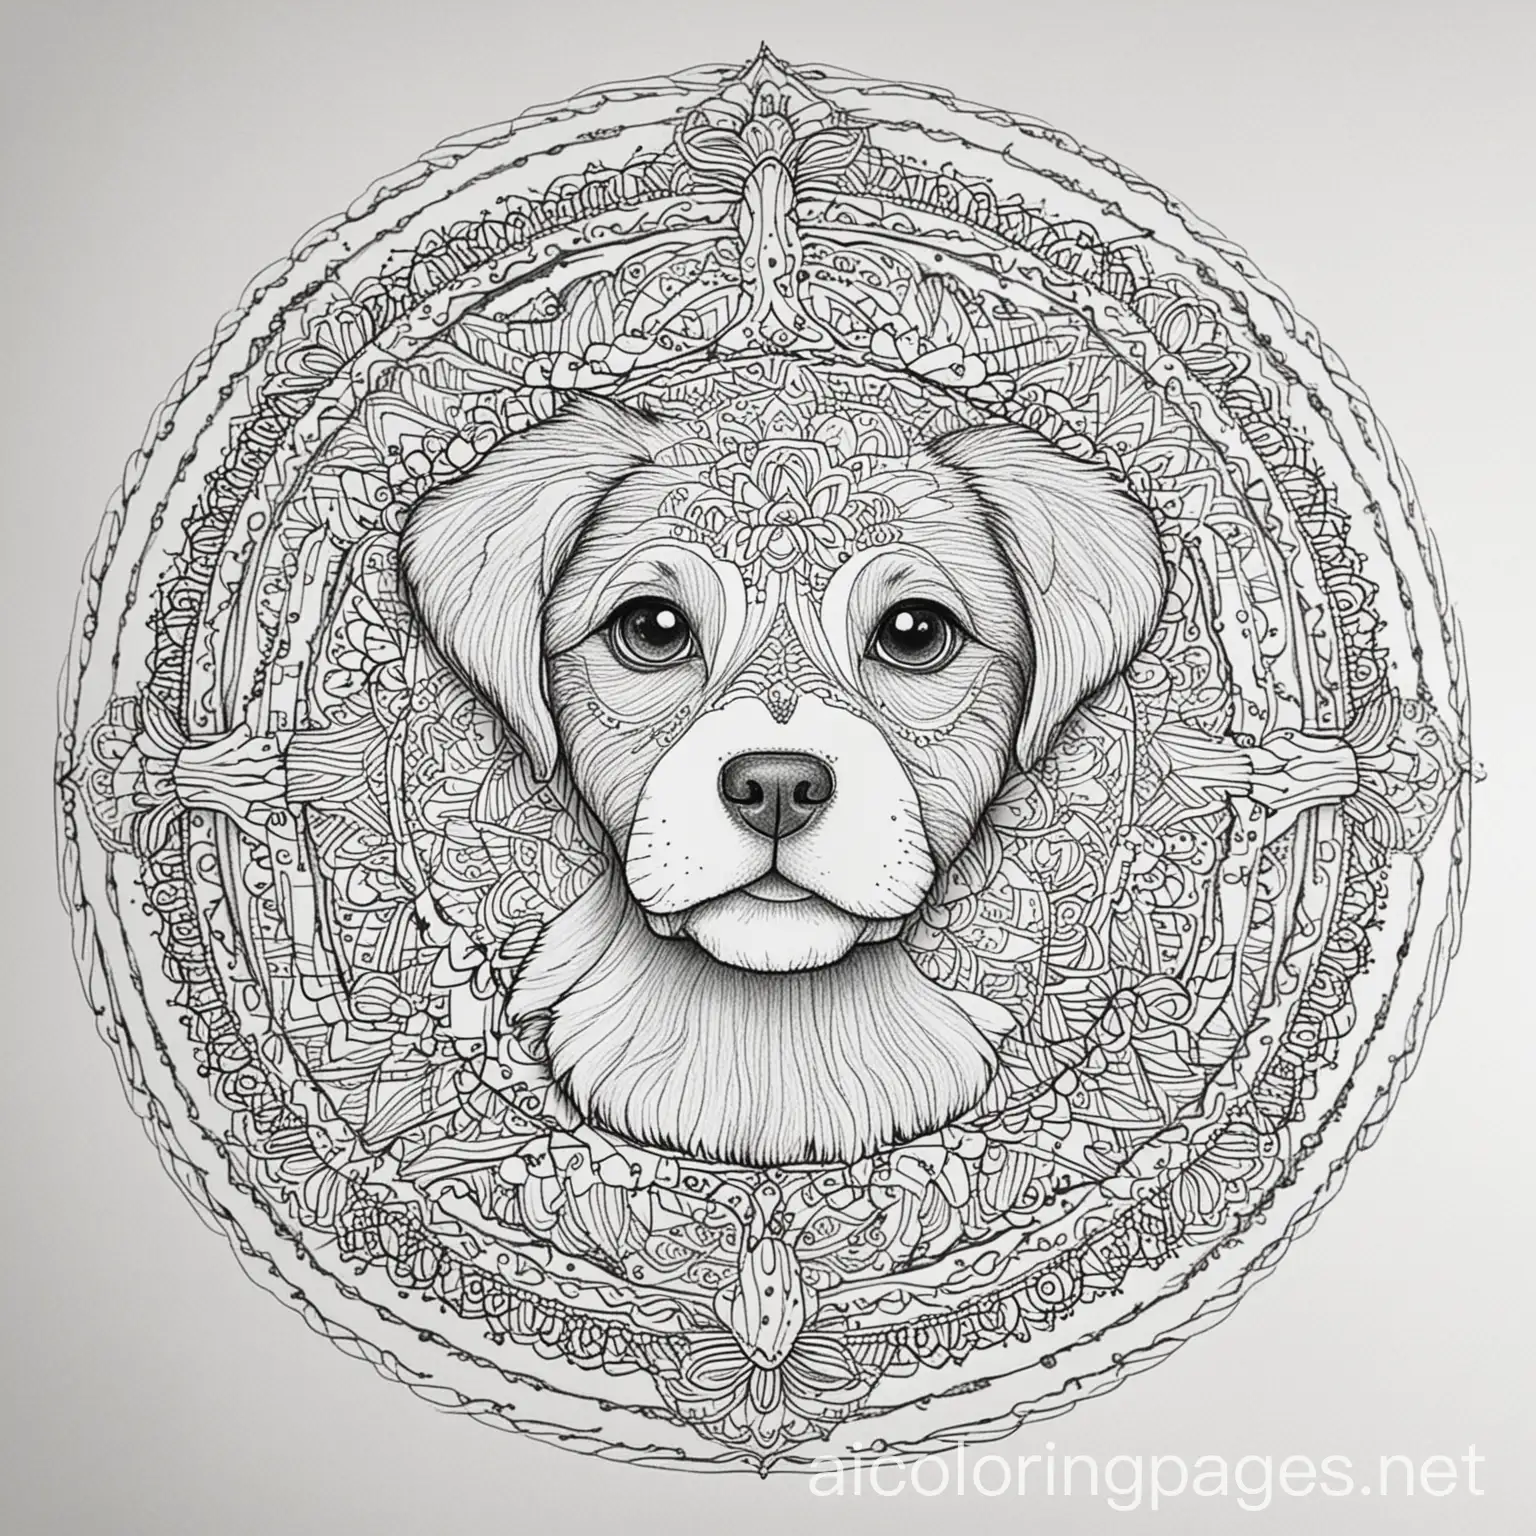 mandala cute puppy for an 8 year old who is a pro in coloring, Coloring Page, black and white, line art, white background, Simplicity, Ample White Space. The background of the coloring page is plain white to make it easy for young children to color within the lines. The outlines of all the subjects are easy to distinguish, making it simple for kids to color without too much difficulty